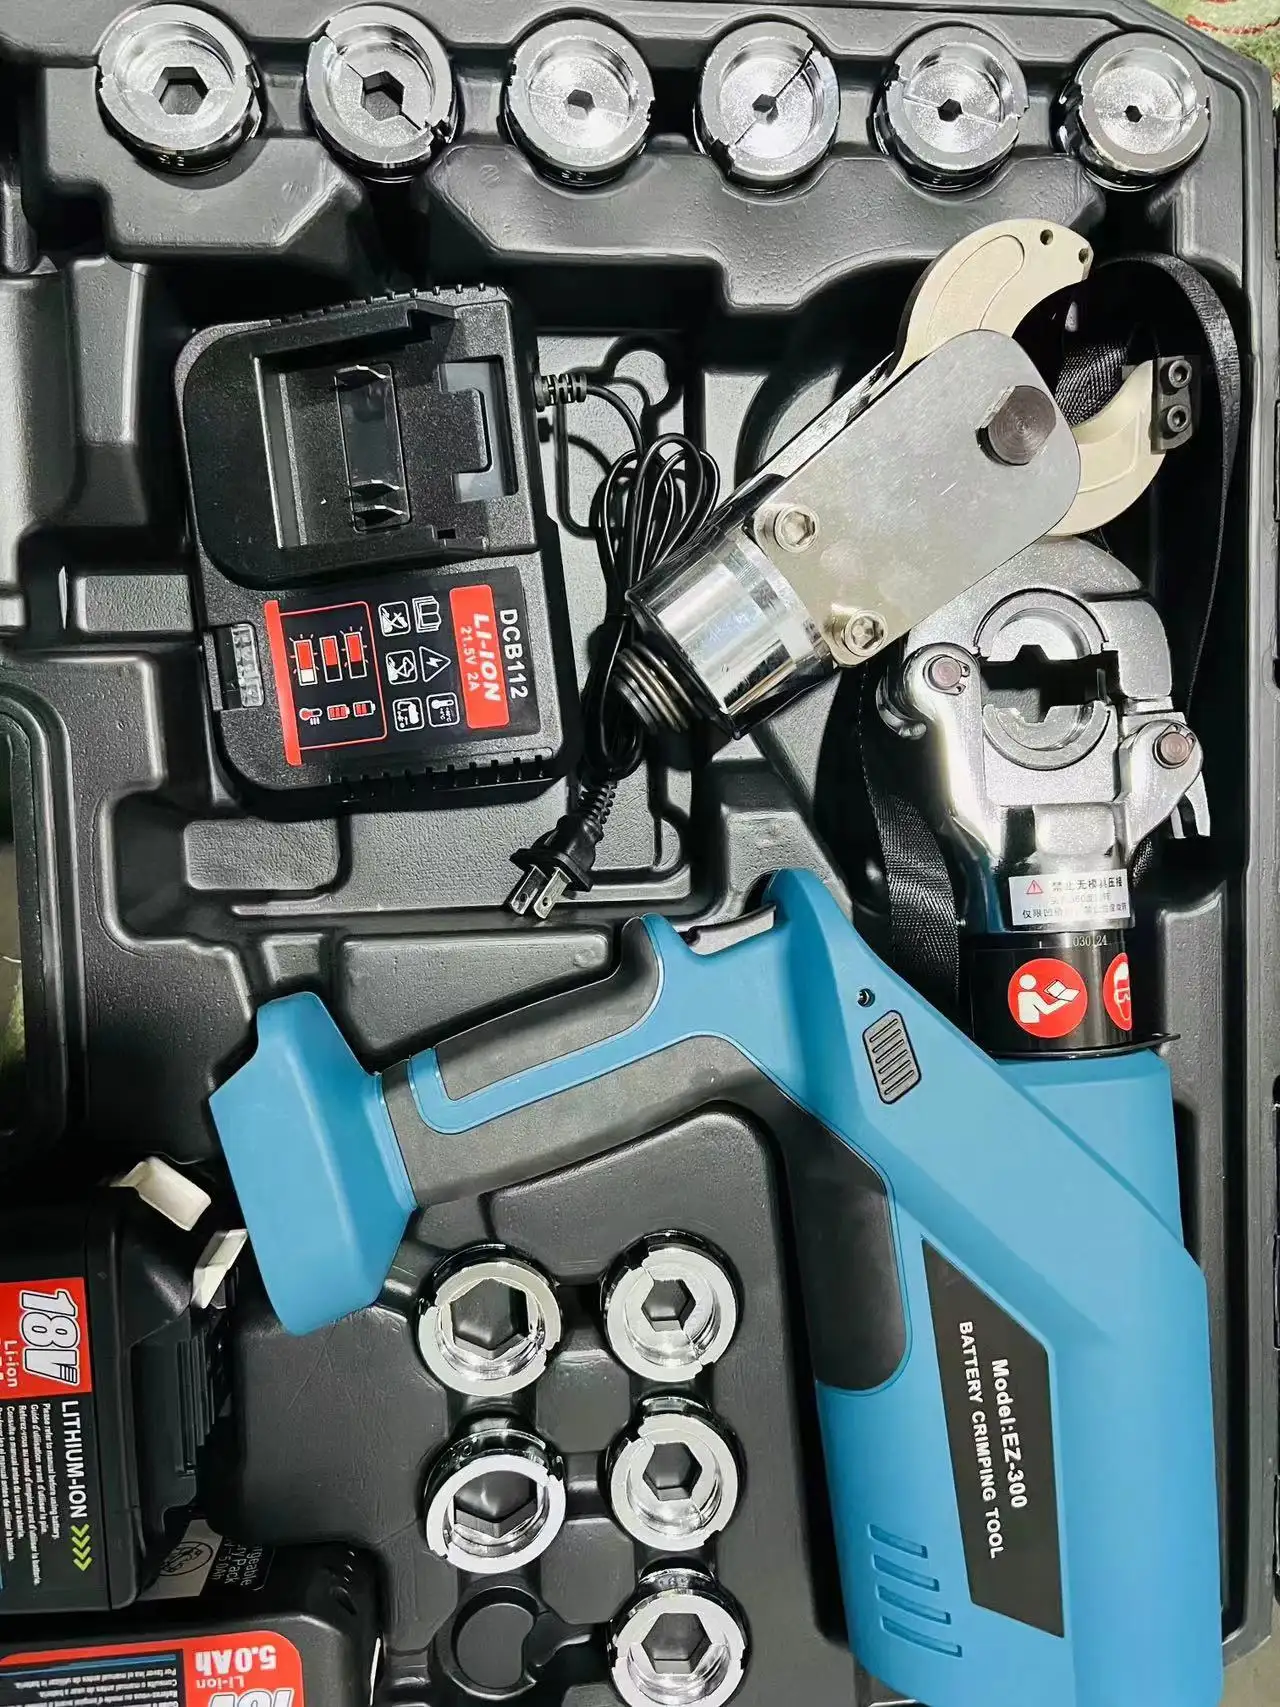 Battery Electric Powered Hydraulic Tool EZ-300/30C 2 in 1 cordless Cutter and Crimper for cable Cutting and Crimping